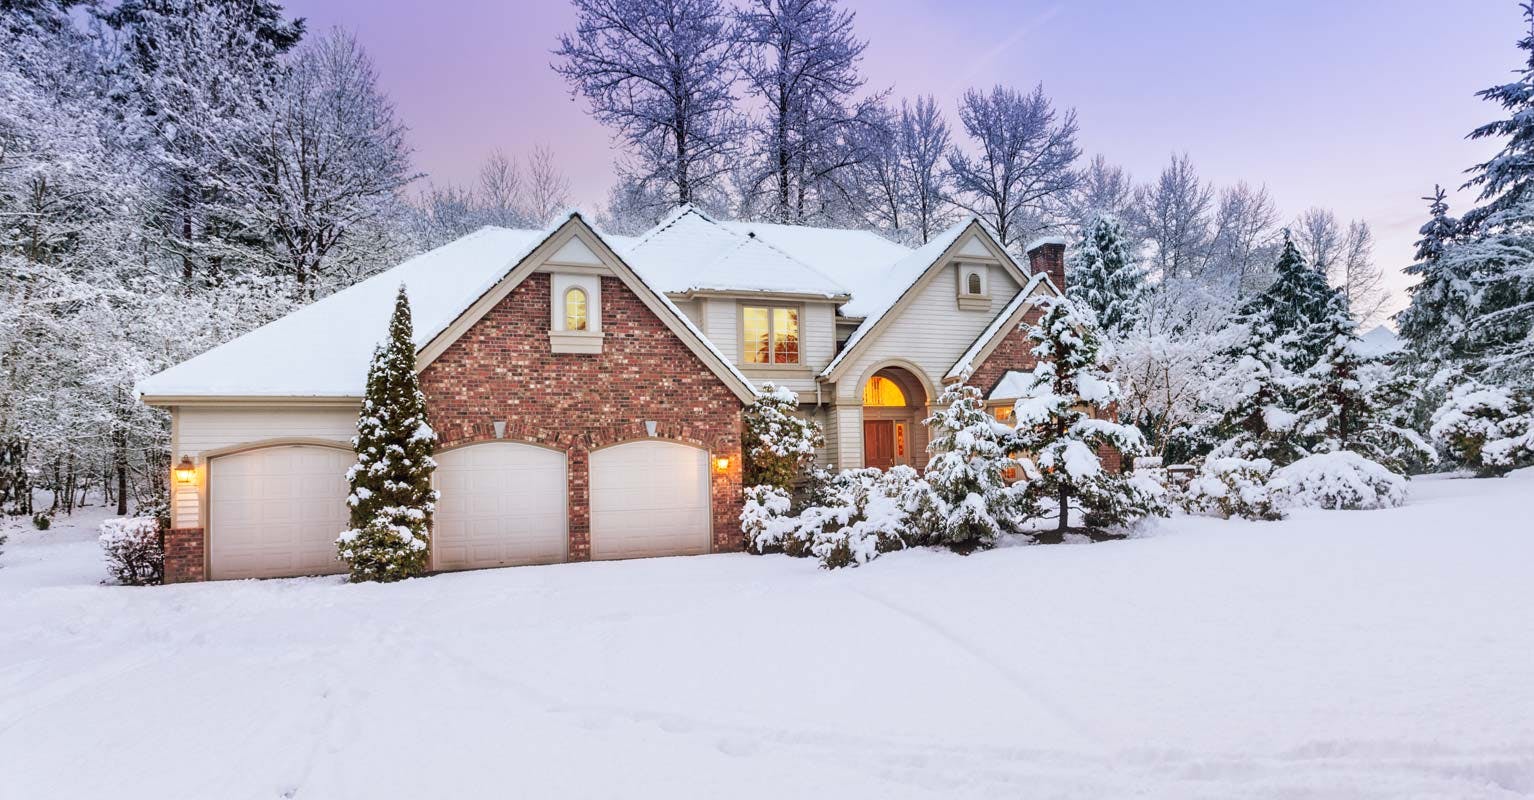 Beautiful home in snowy, winter weather